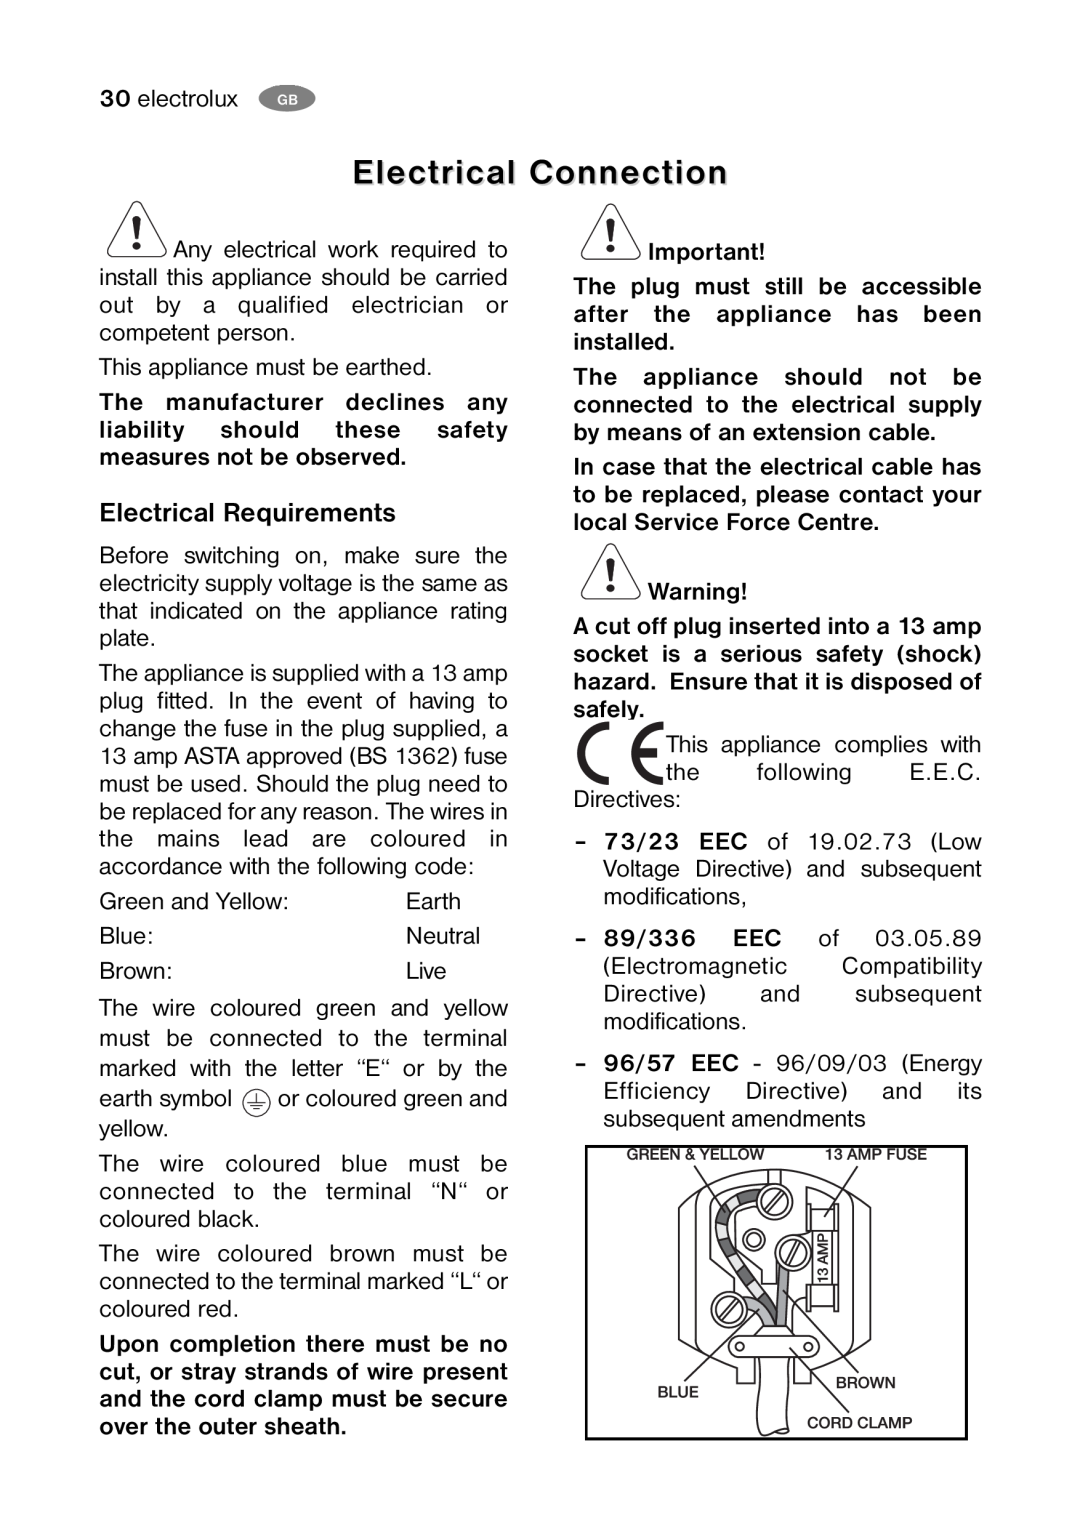 Electrolux ENB 38607 X, ENB 38607 W8 user manual Electrical Connection, Electrical Requirements 